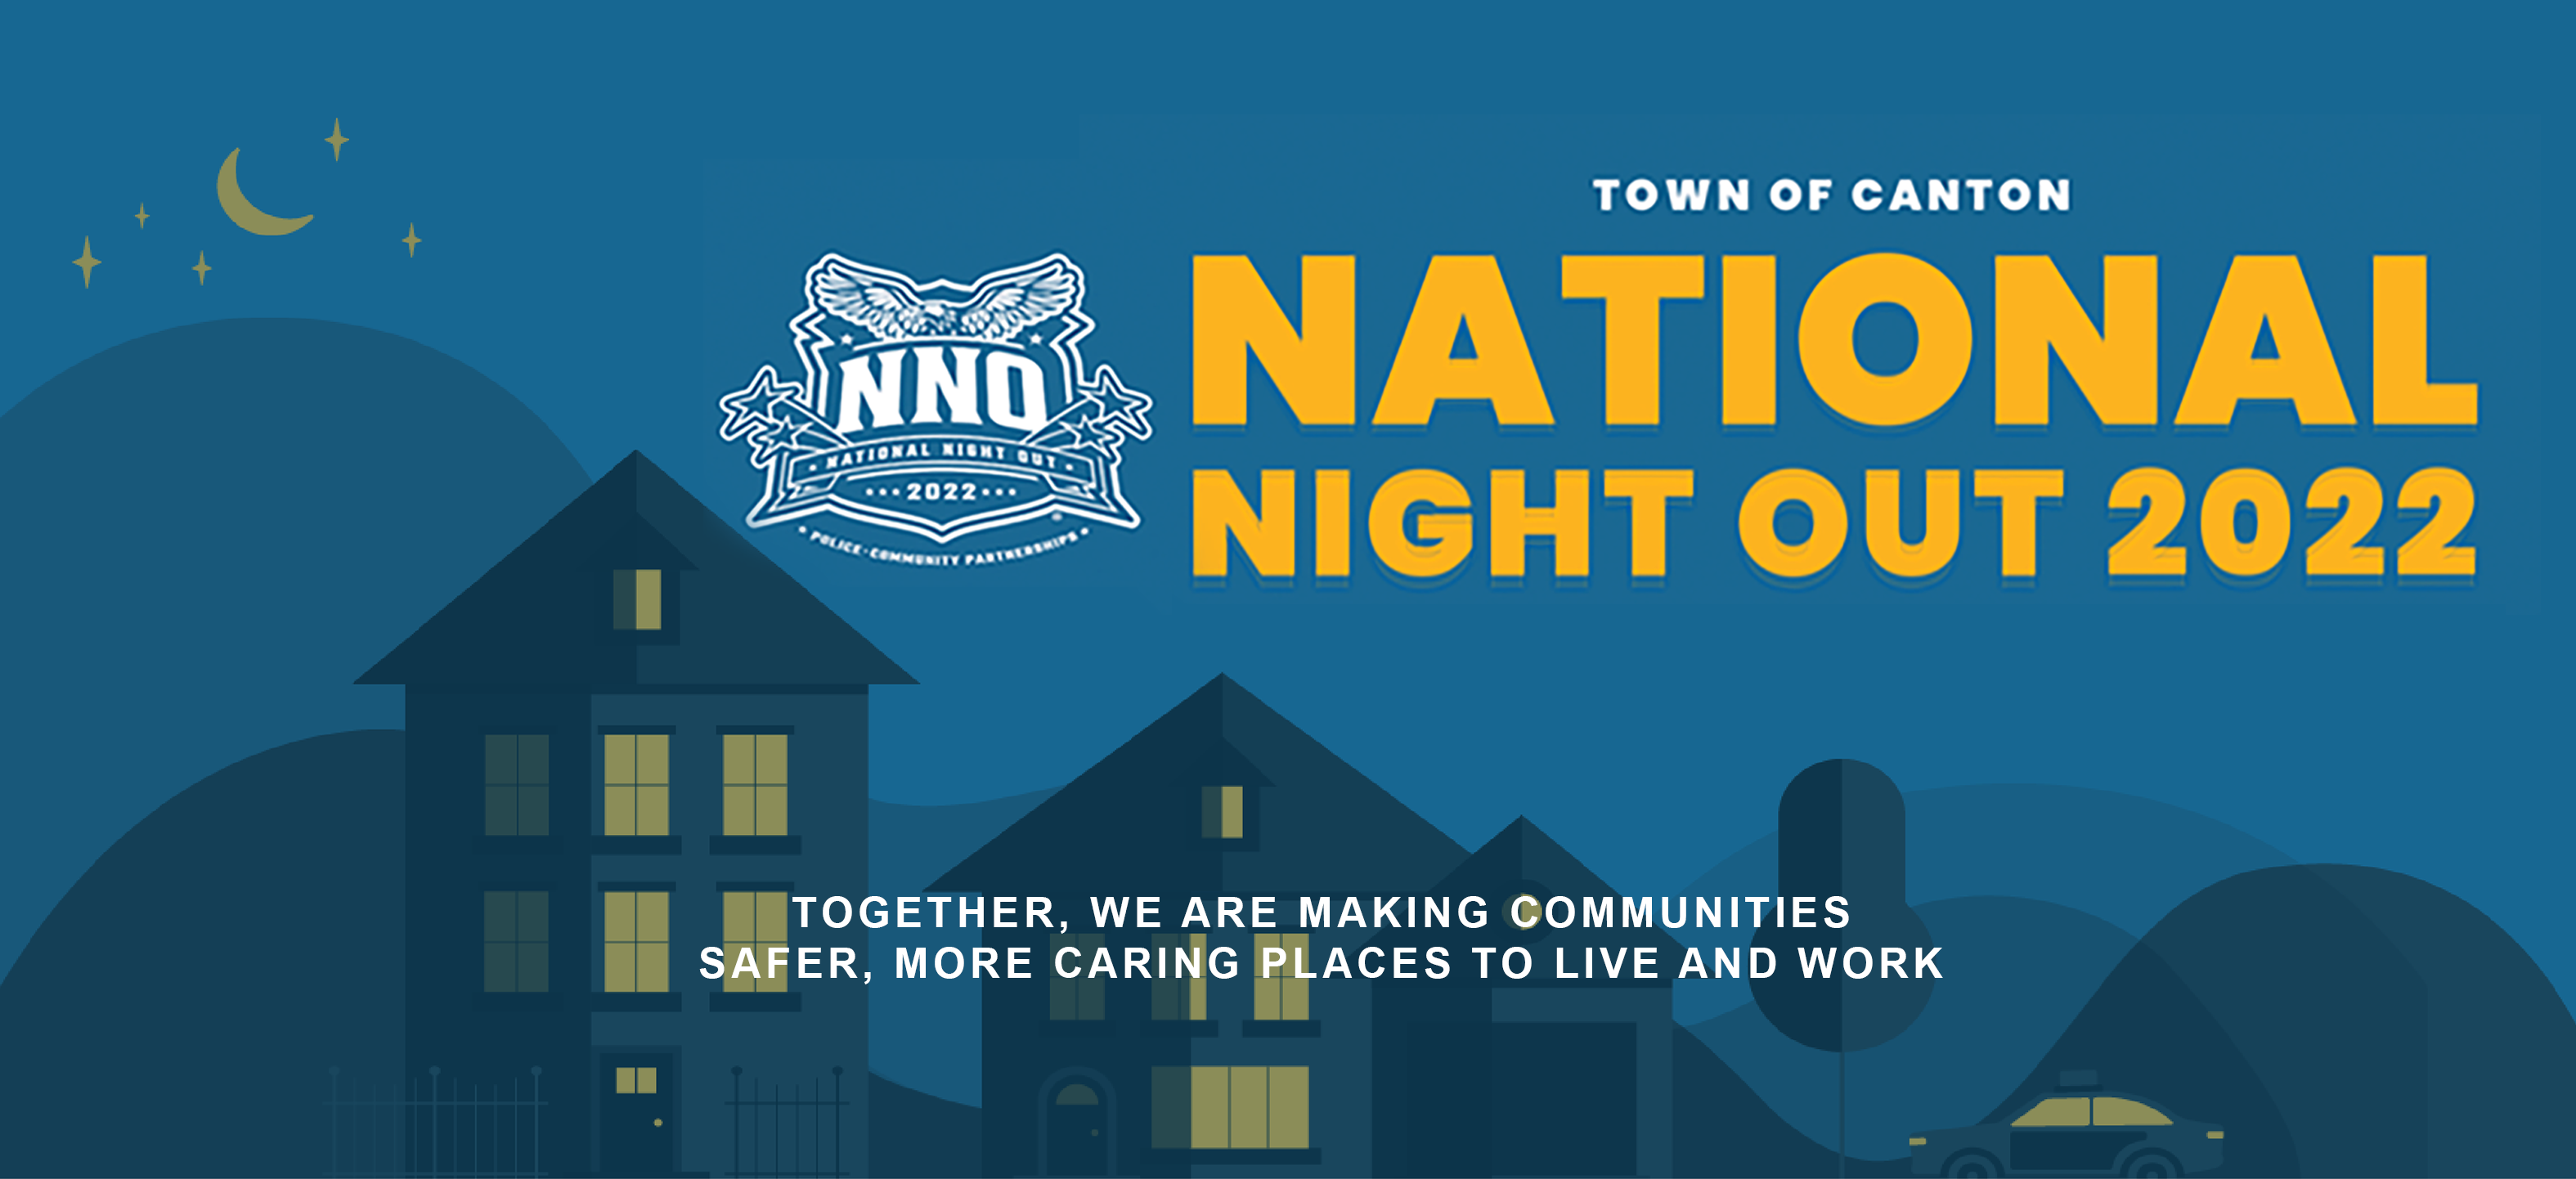 Town of Canton National Night Out